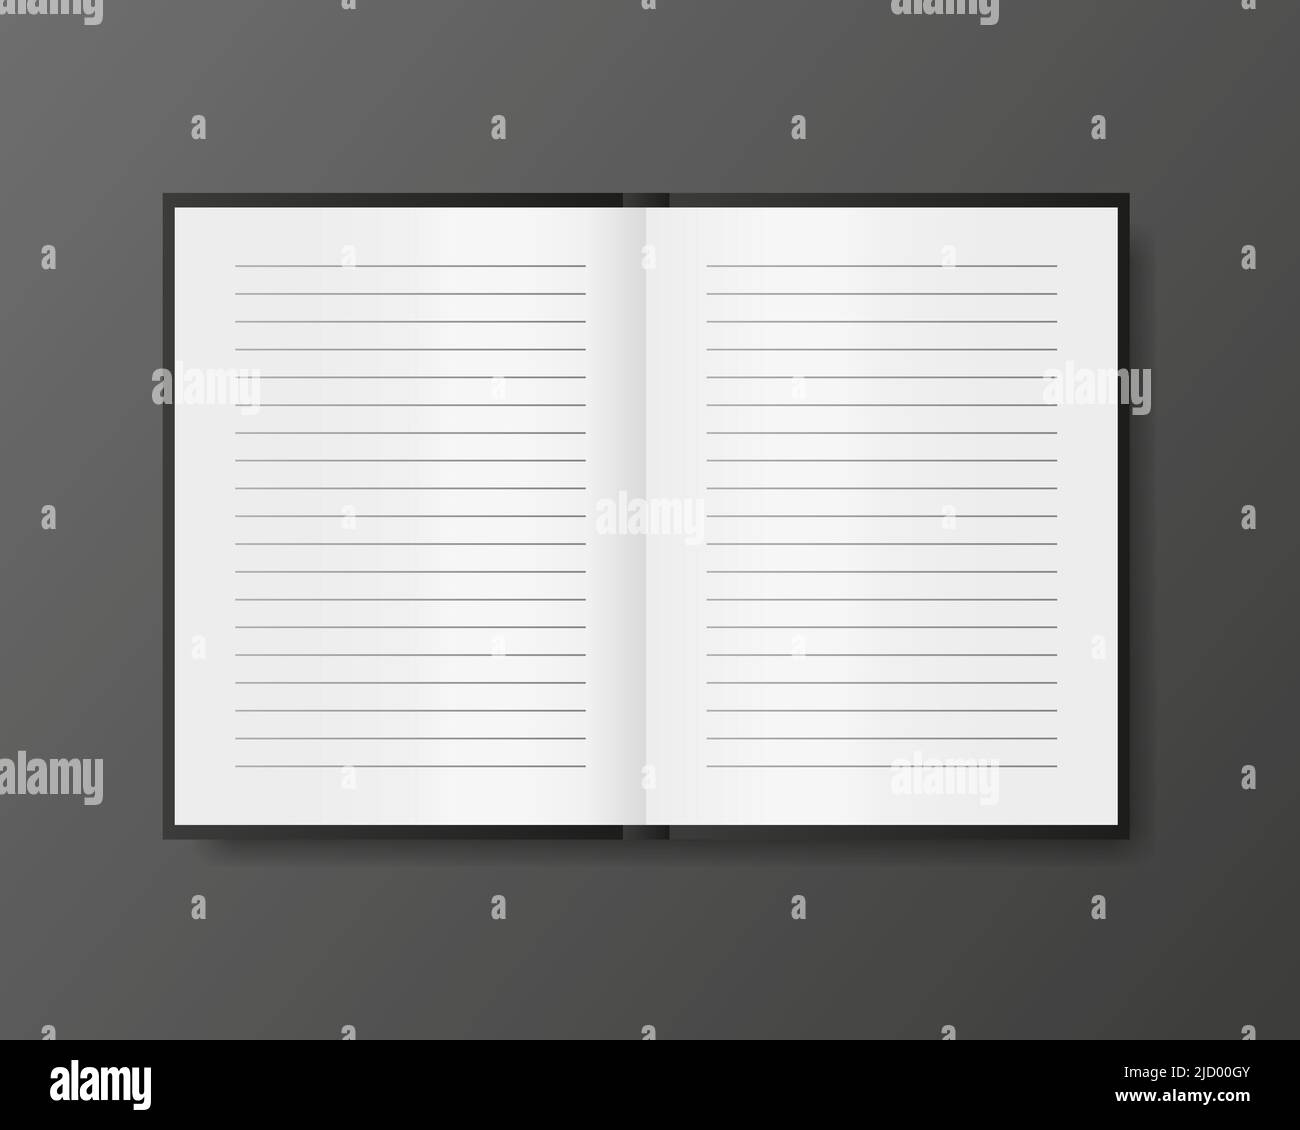 Note page mockup for cover design. Business design. Poster design. White background. Business card. Book page. Vector illustration. Stock Vector